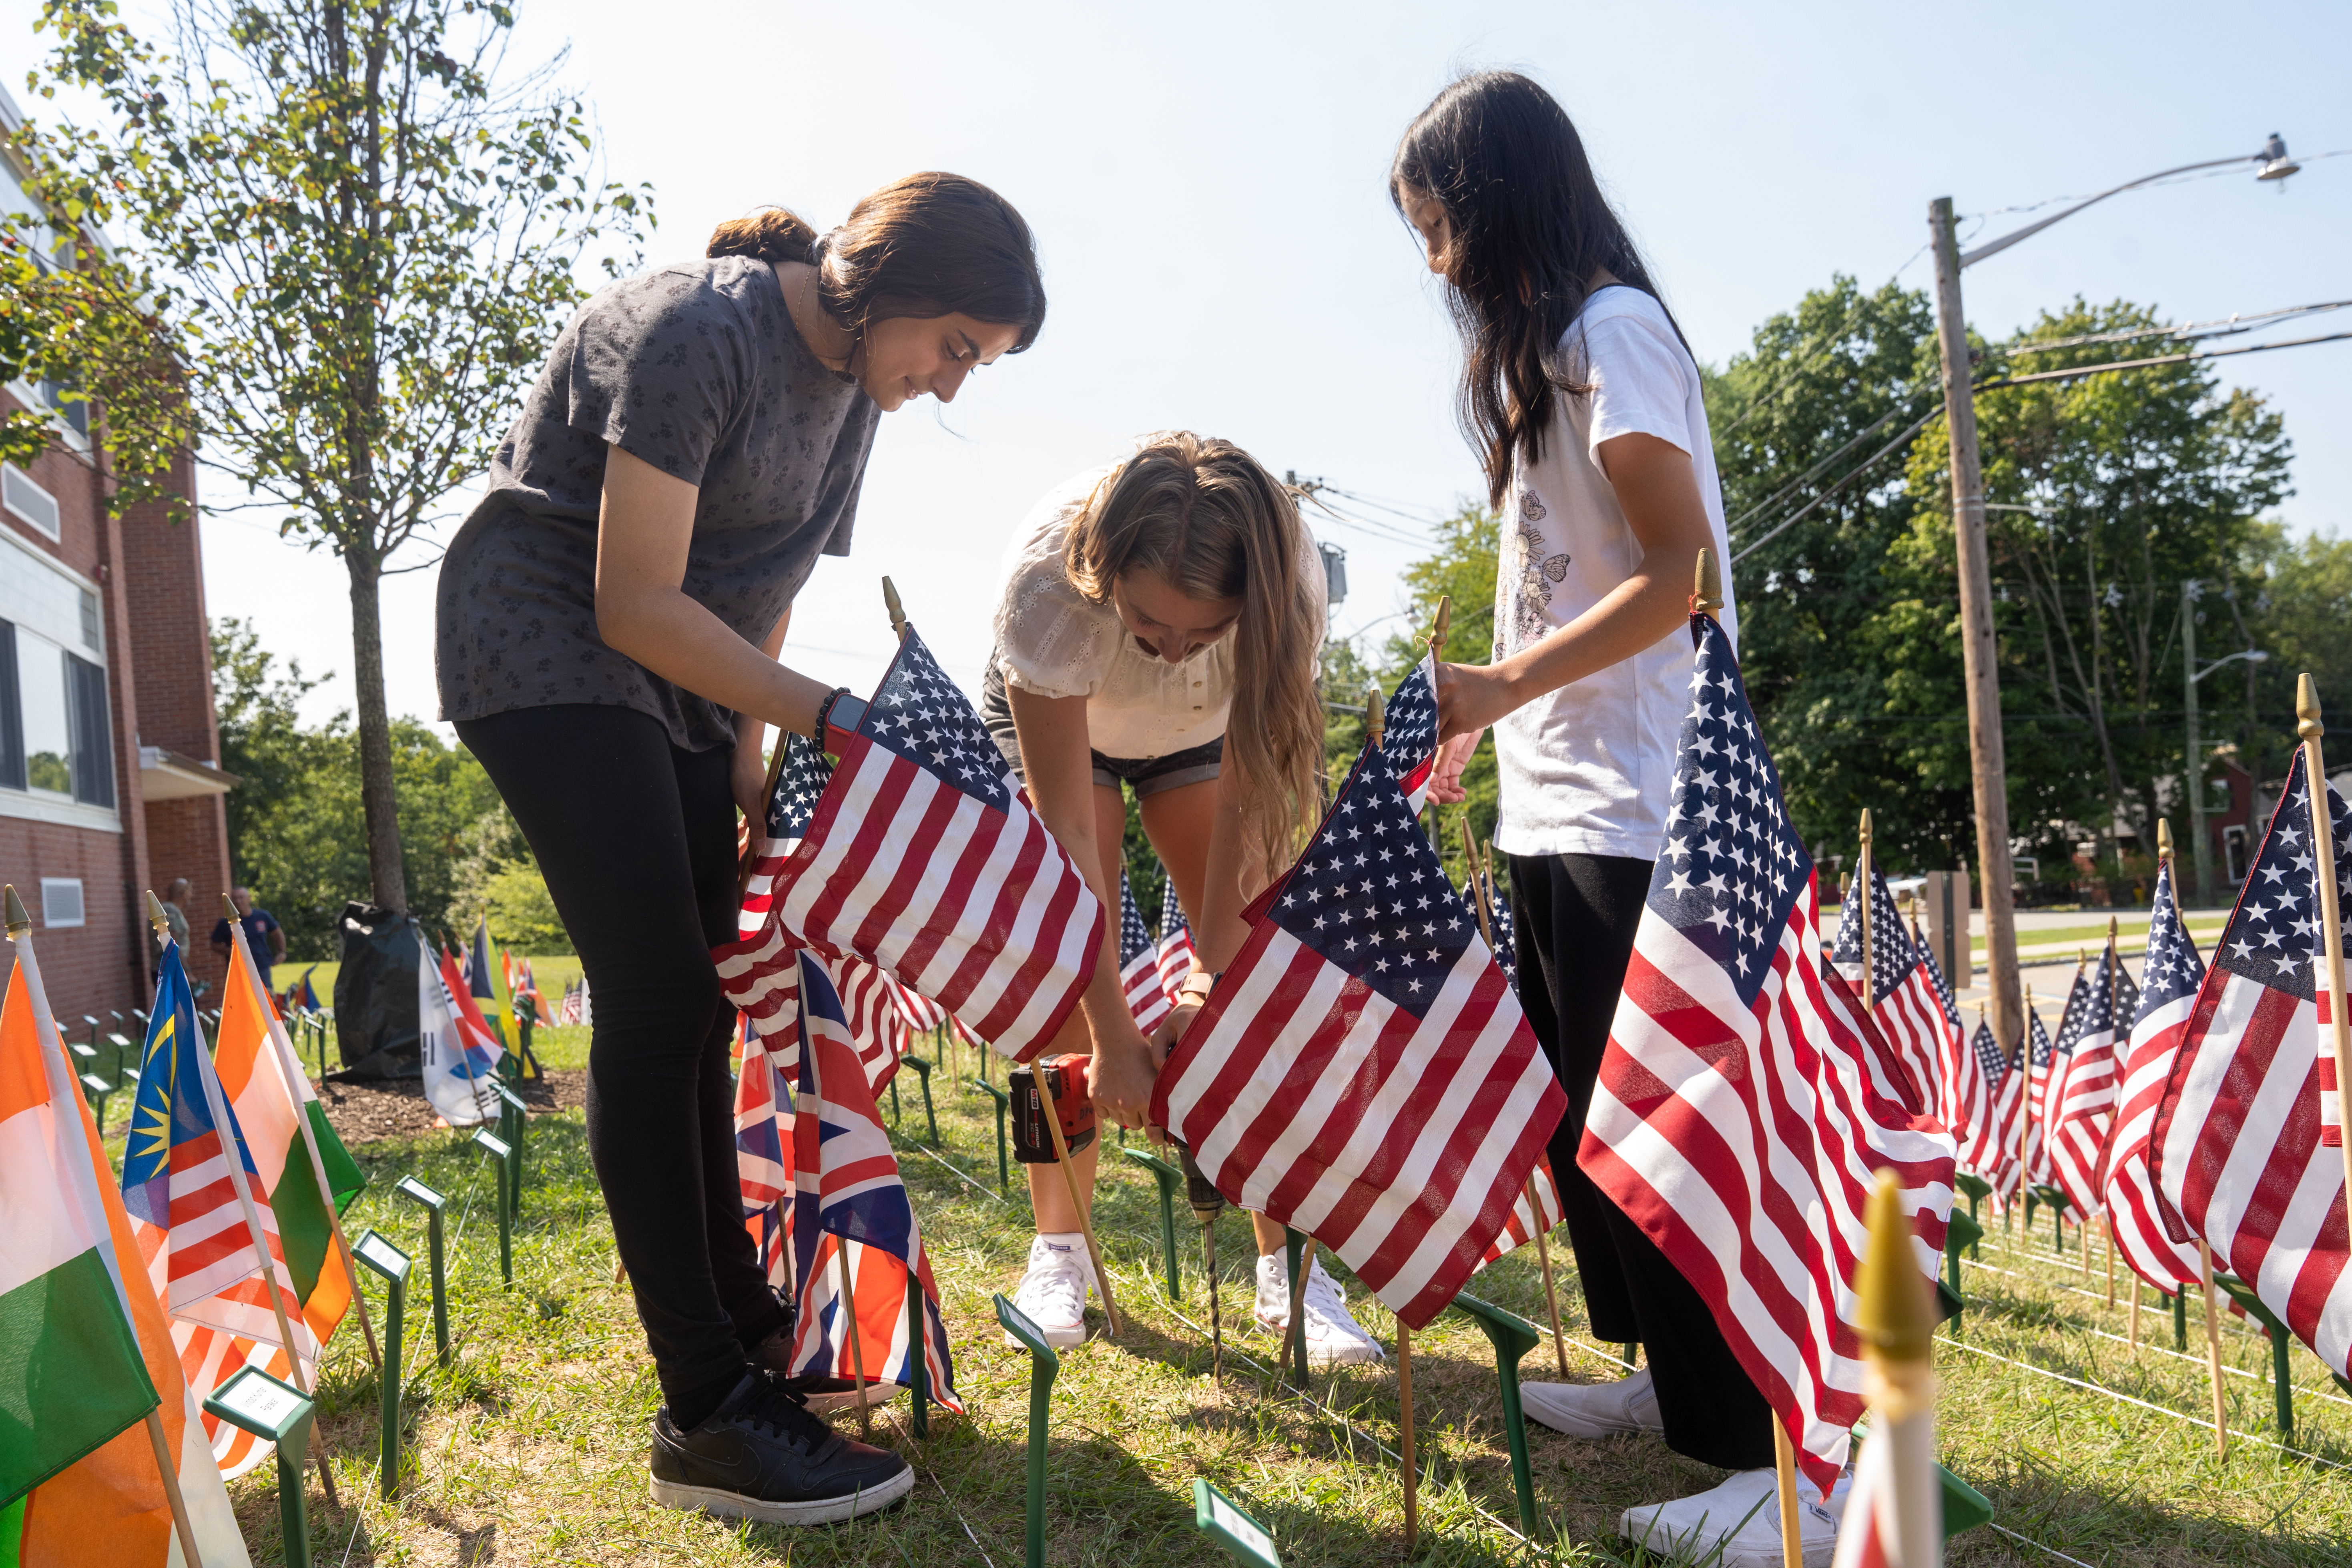 What should N.J. students born after 9/11 be taught about the